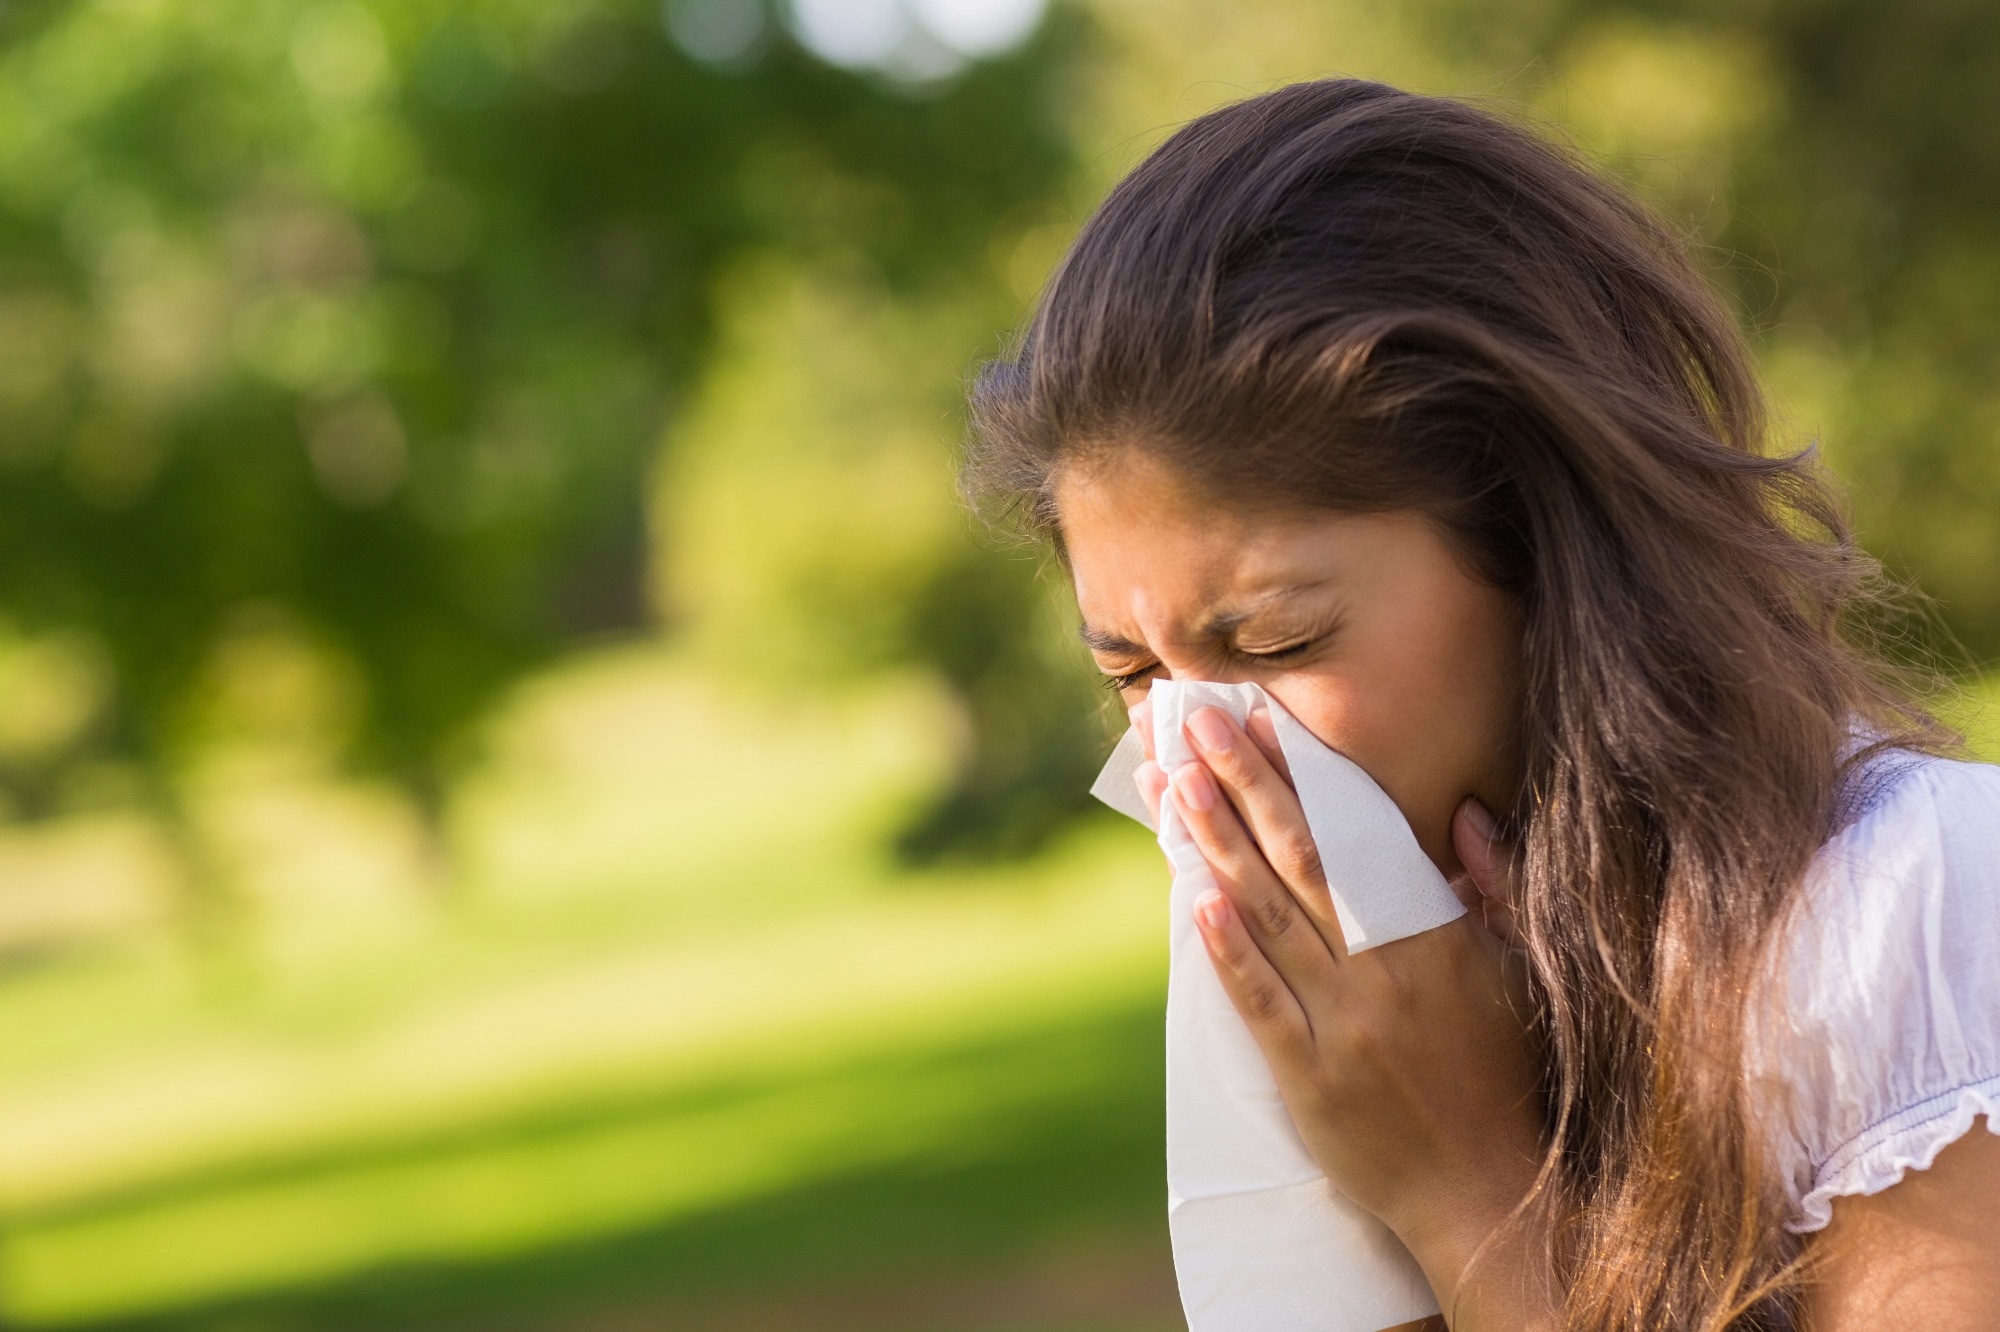 Study: Incident allergic diseases in post-COVID-19 condition: multinational cohort studies from South Korea, Japan and the UK. Image Credit: wavebreakmedia/Shutterstock.com